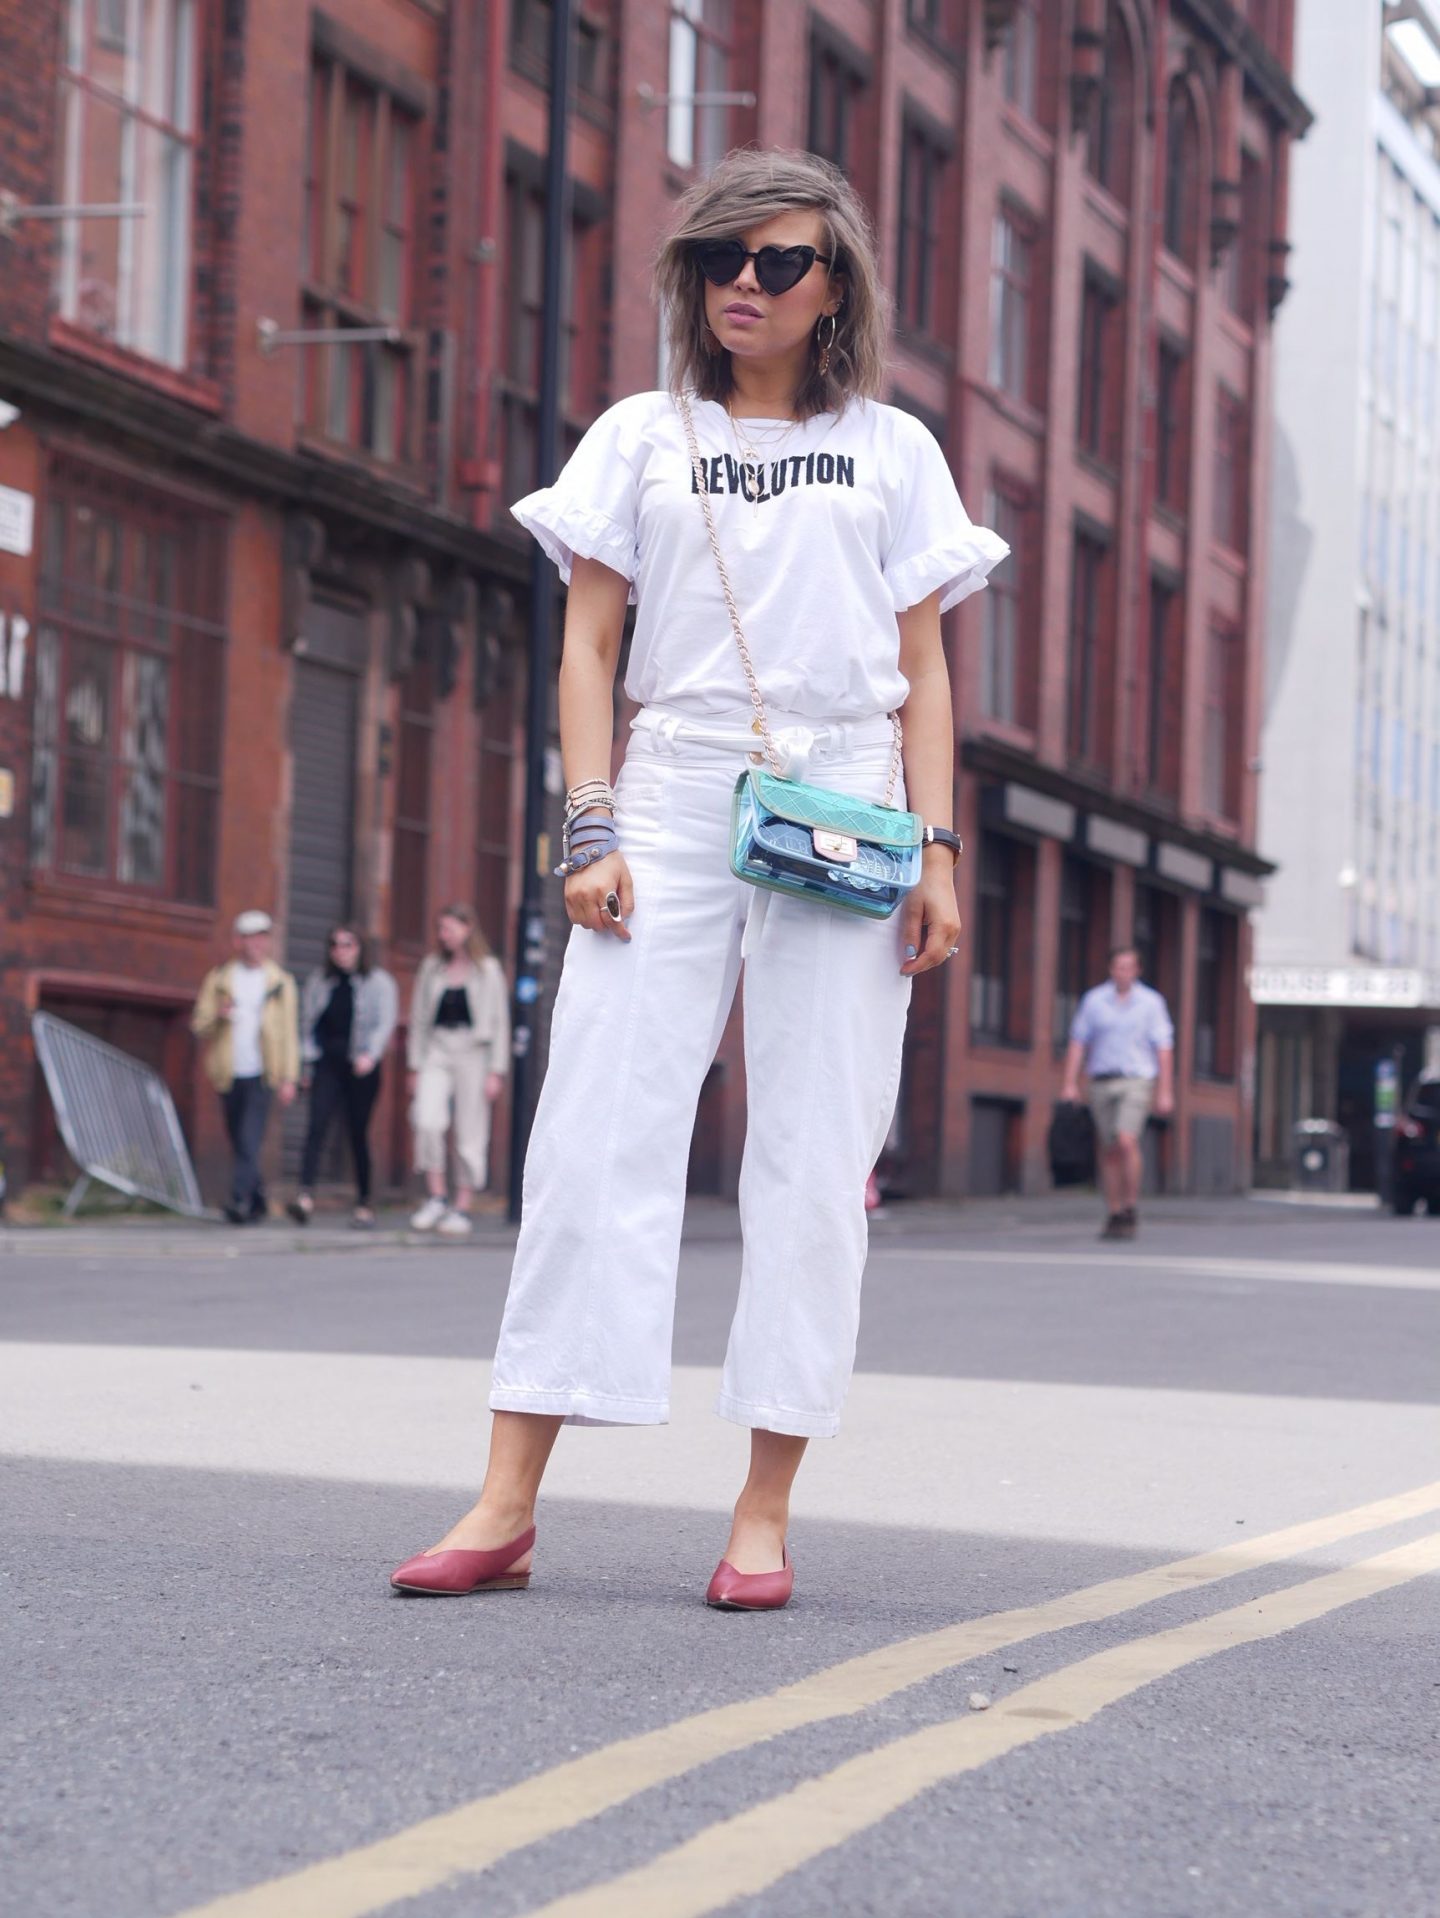 manchester blogger, manchester fashion blogger, outfit of the day, street style, beauty blogger 